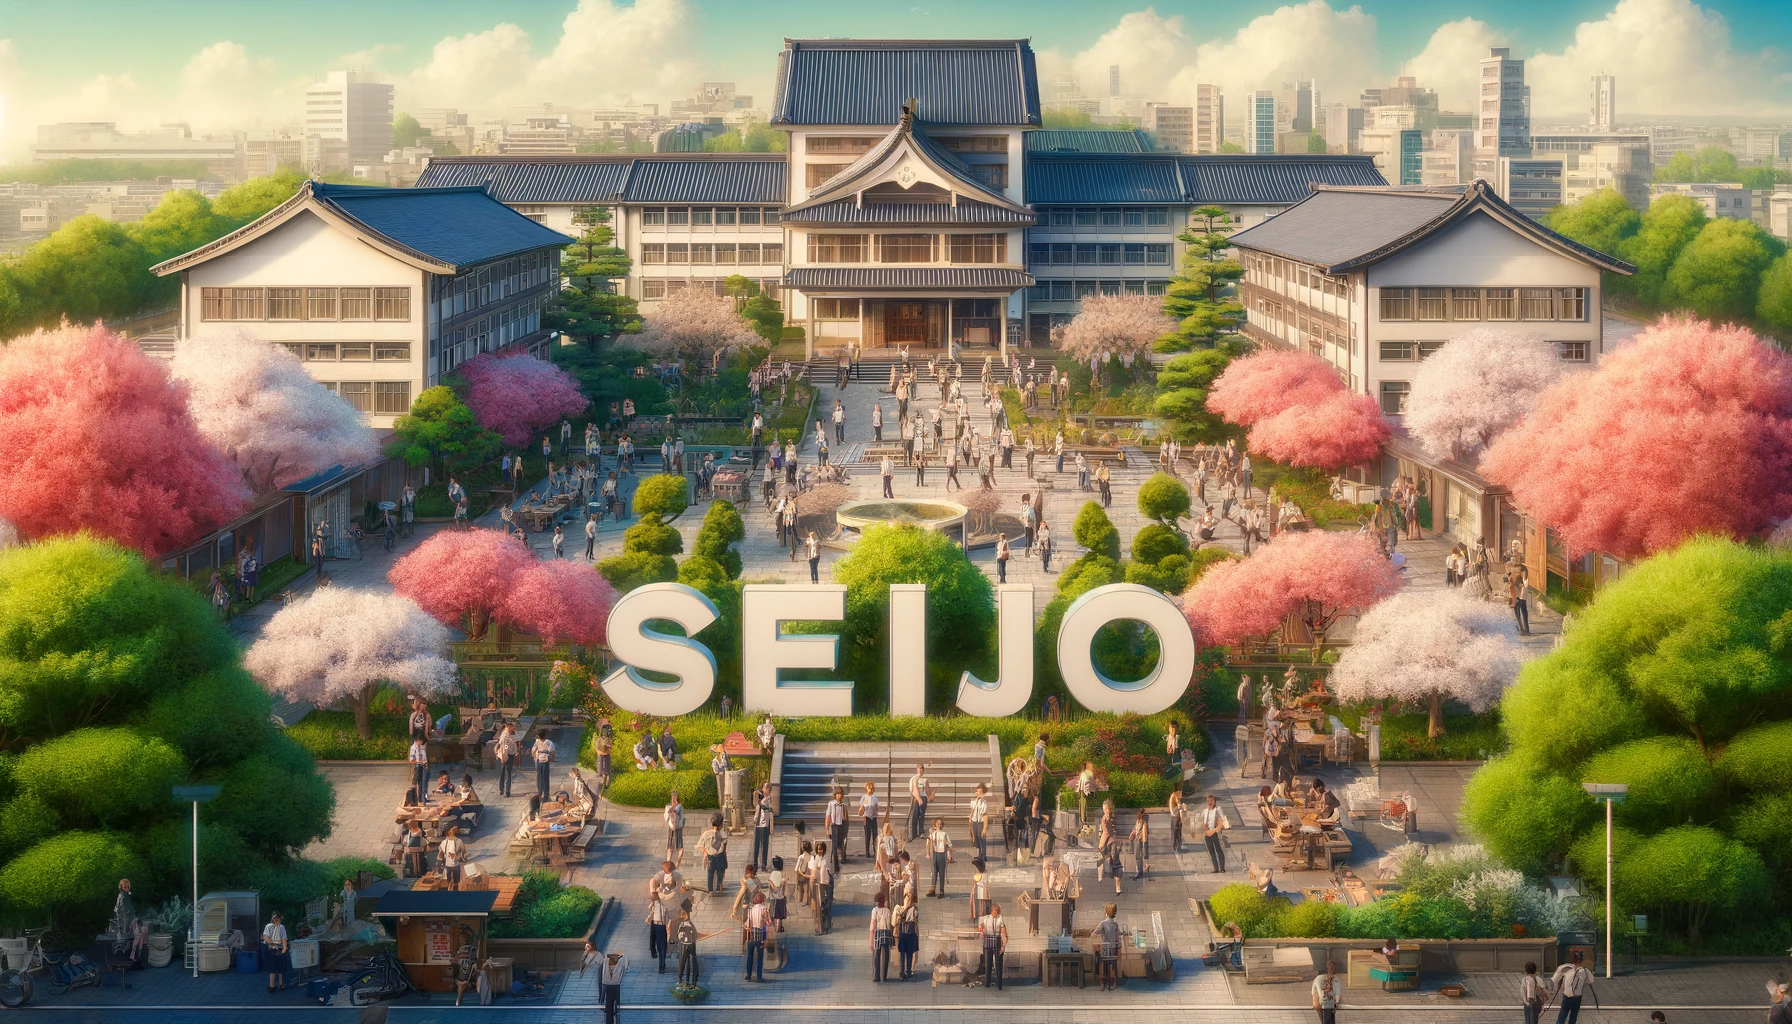 A vibrant and picturesque scene at Seijo Gakuen Junior High School in Japan, showcasing its popularity with the word 'Seijo' in English, very prominently displayed across the entire image, almost like a watermark. The word is large and bold, superimposed over the scene without obstructing the view of the activities. The campus is bustling with activity, featuring a diverse group of students of various Asian descents, wearing traditional school uniforms. They are engaging in a variety of activities such as studying outdoors, participating in club activities, and socializing in beautifully landscaped gardens. The architecture is a blend of modern and classic styles, with lush greenery and blooming cherry trees adding to the school’s prestigious atmosphere. The scene is lively and dynamic, reflecting a well-loved and vibrant educational environment.